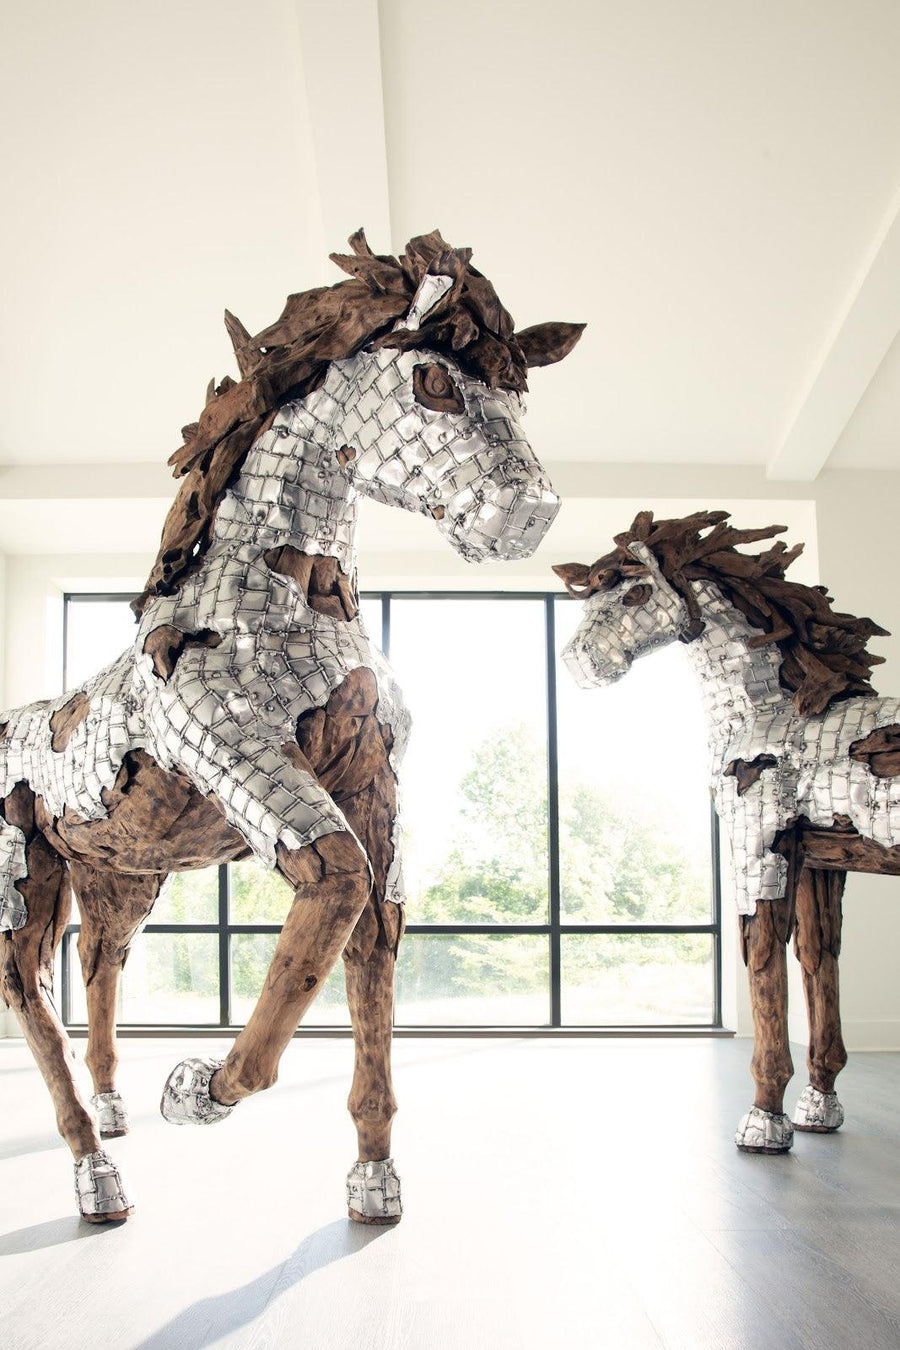 Mustang Horse Armored Sculpture Galloping - Maison Vogue